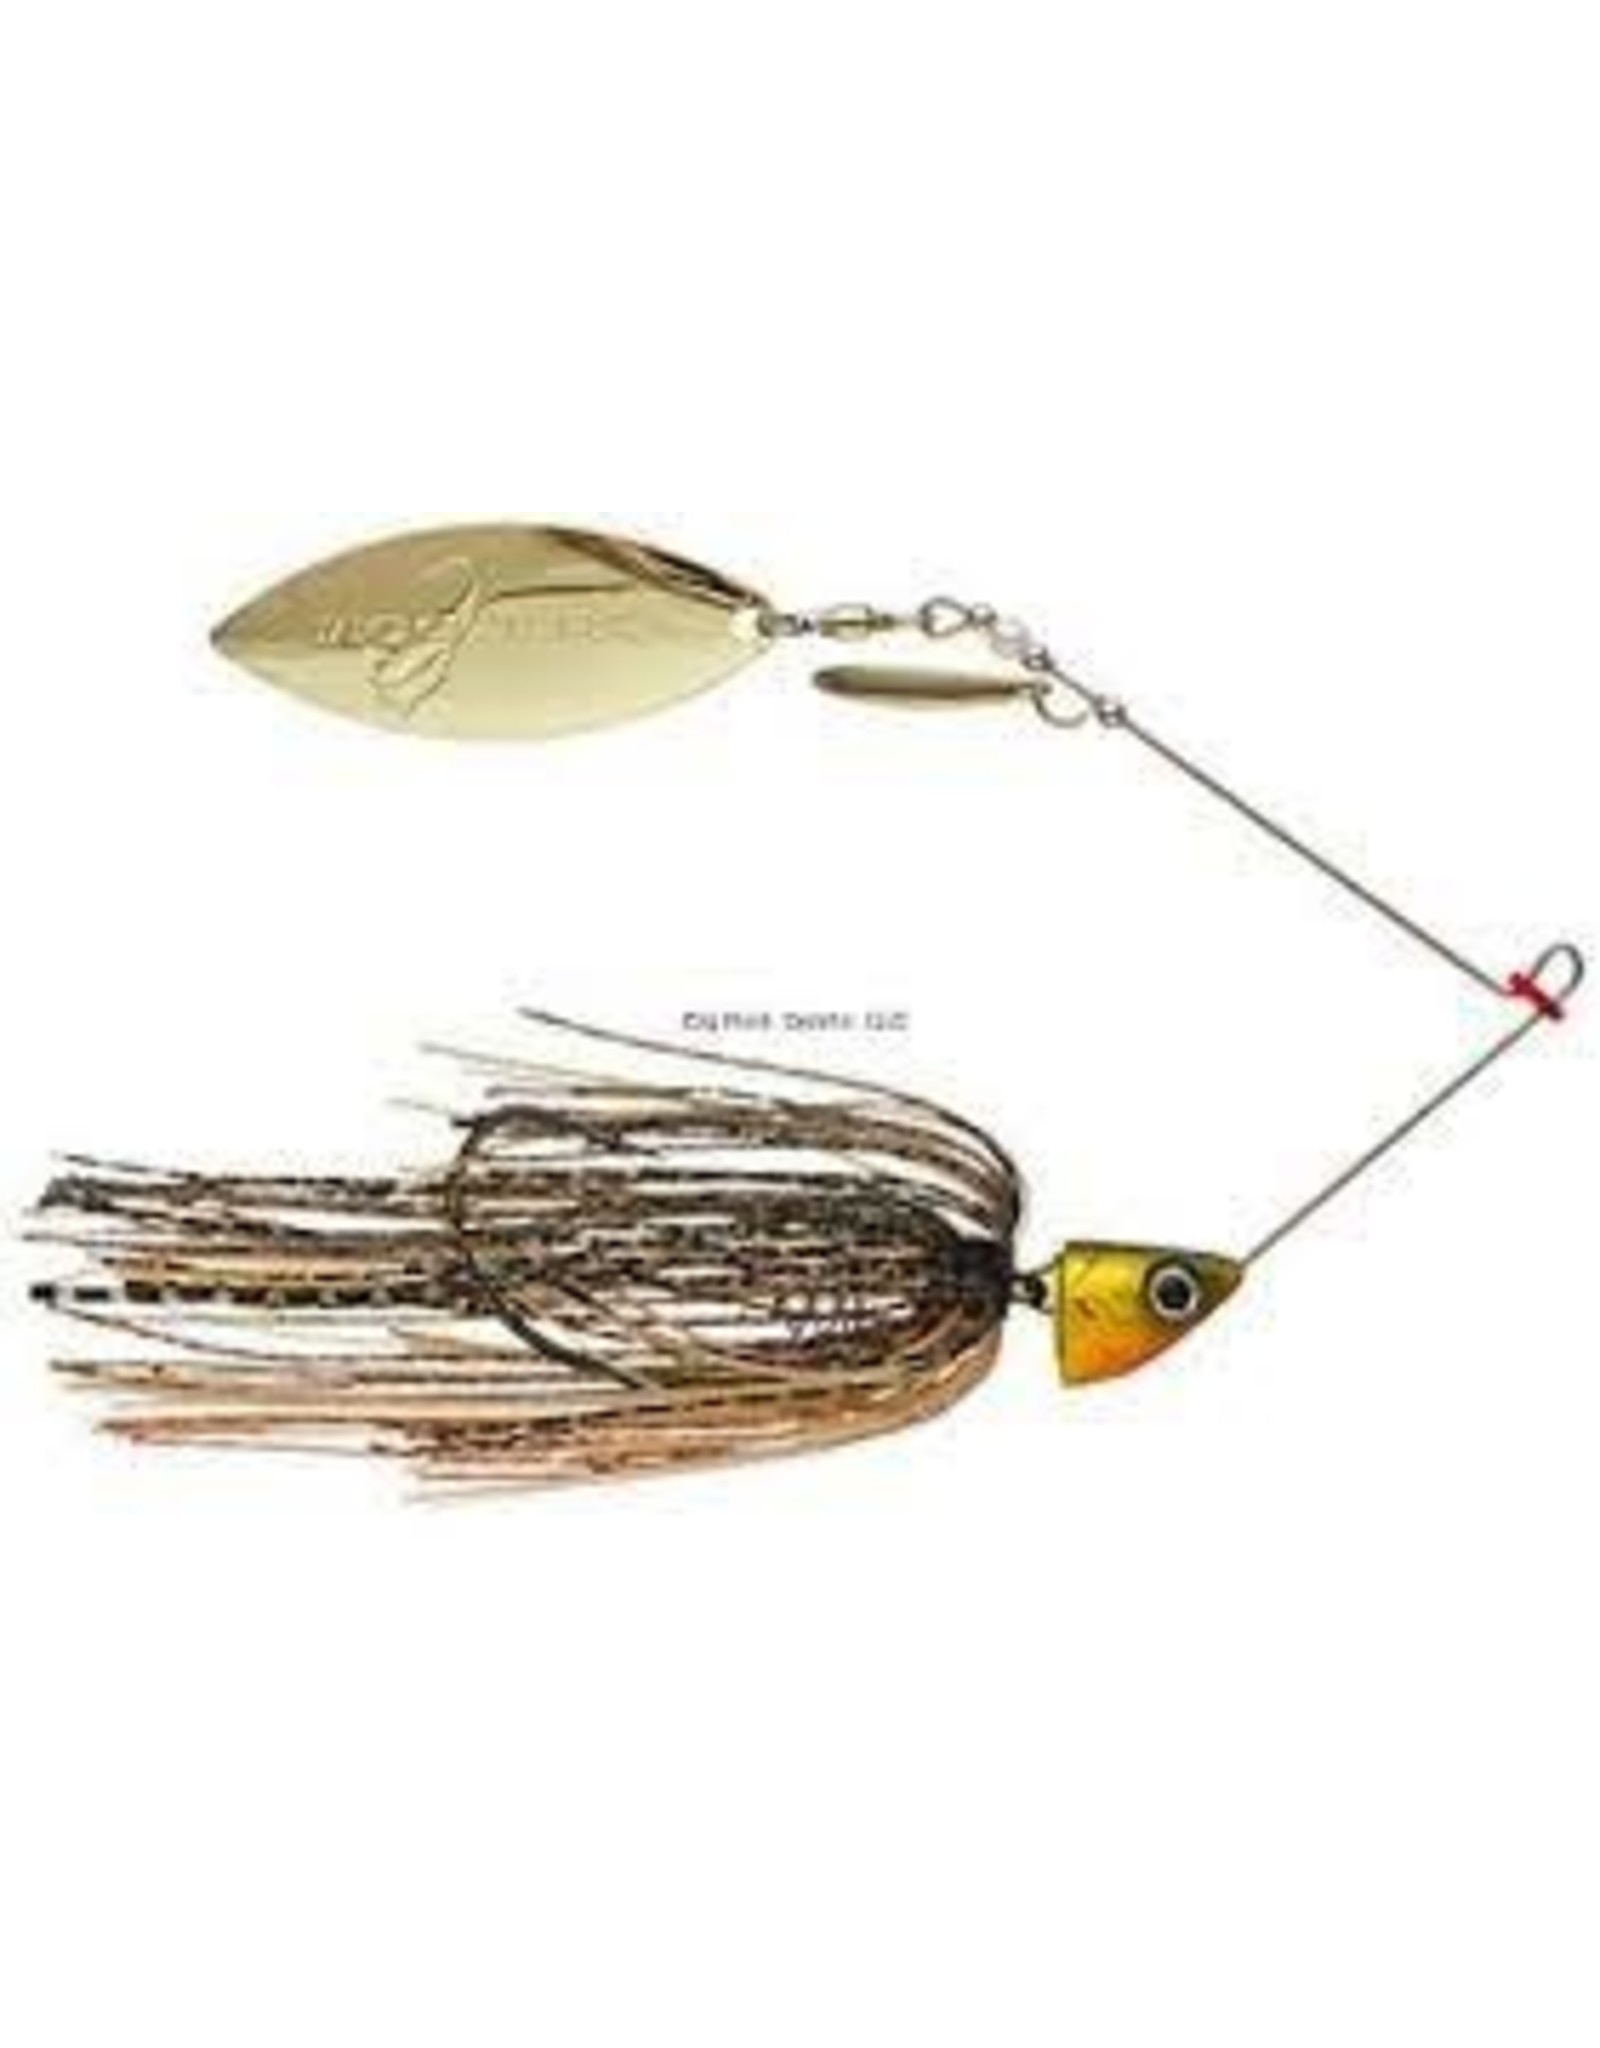 Freedom Freedom Tackle - Spinnerbait Double Willow - Bluegill 3/4 oz